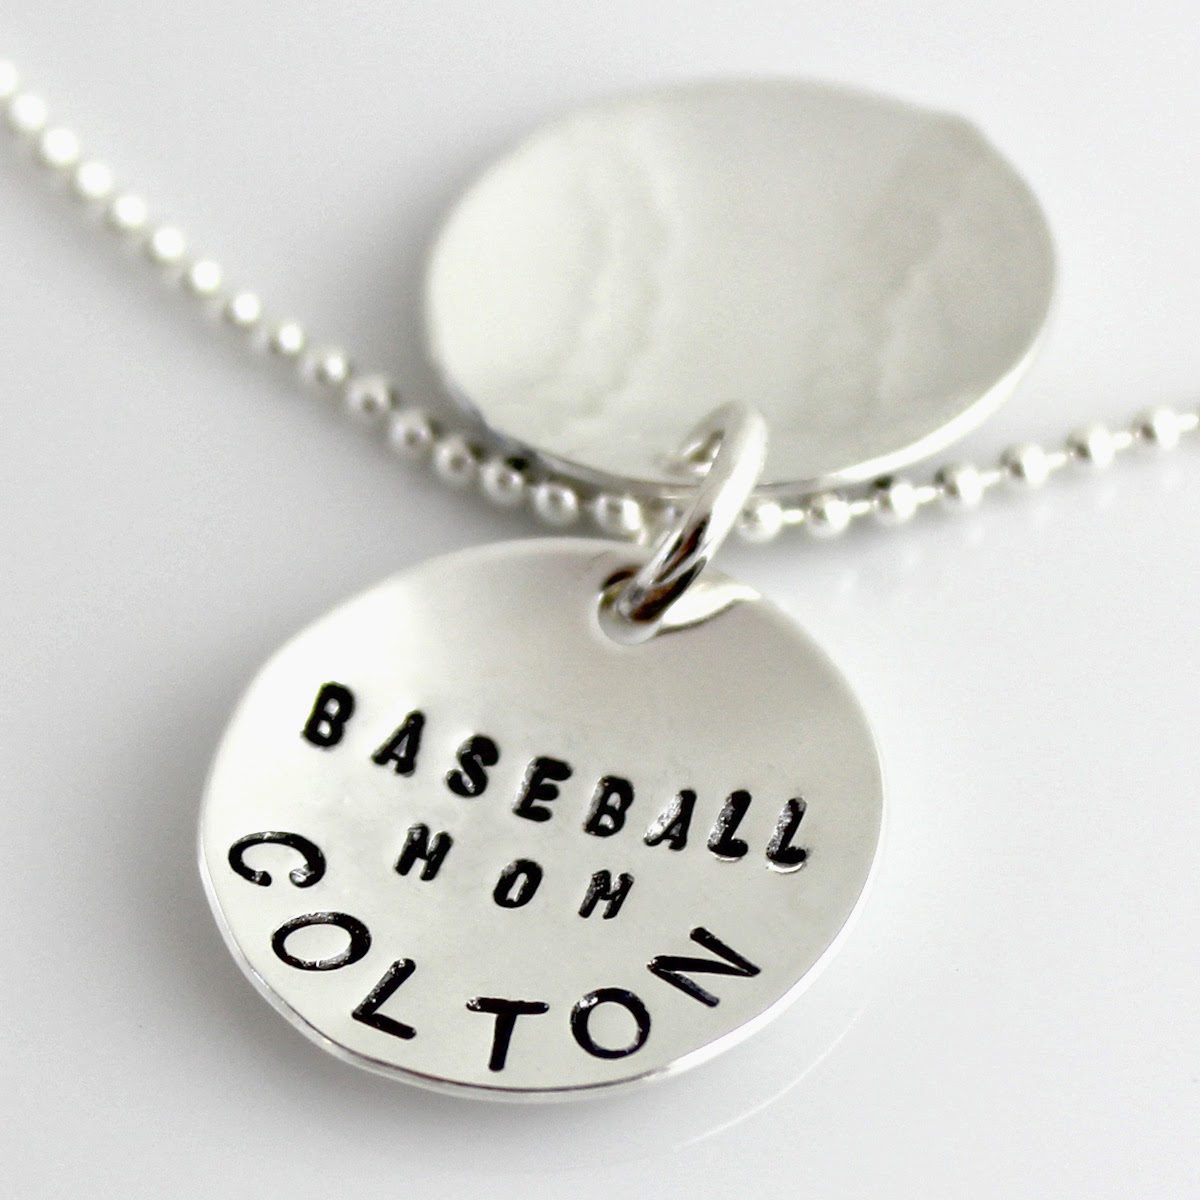 http://shop.punkyjane.com/Baseball-Mom-hand-stamped-and-personalized-faux-locket-4520.htm